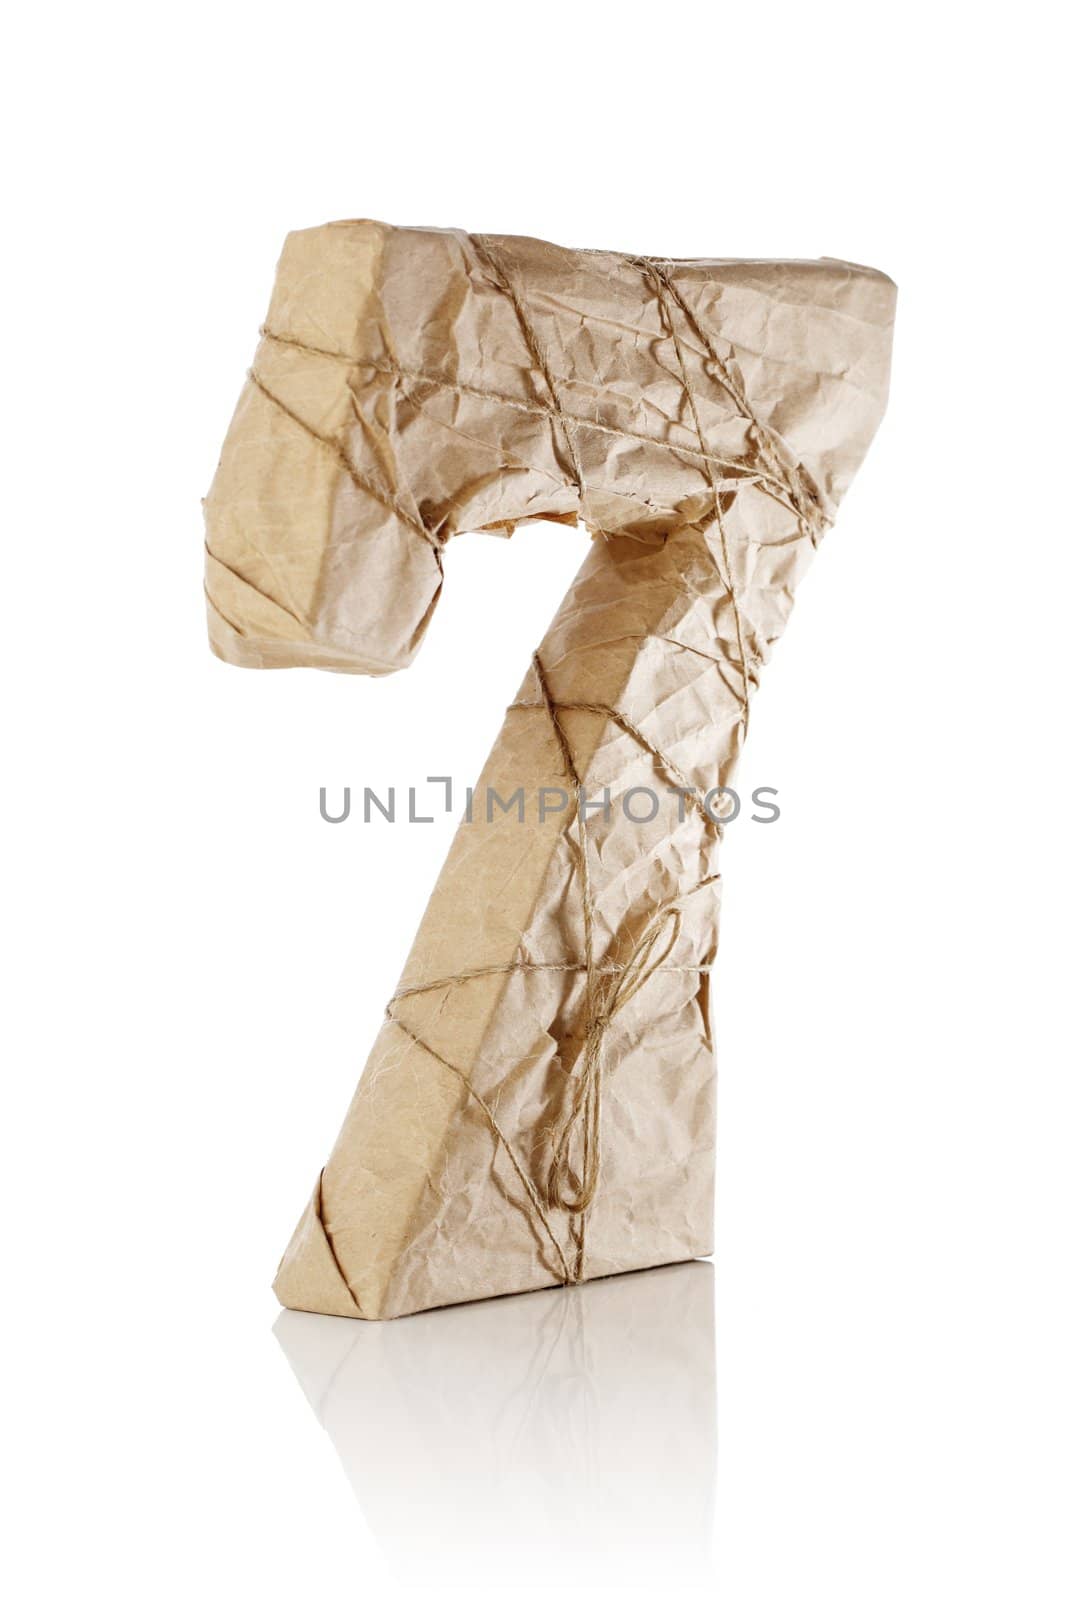 Number seven wrapped in brown paper.